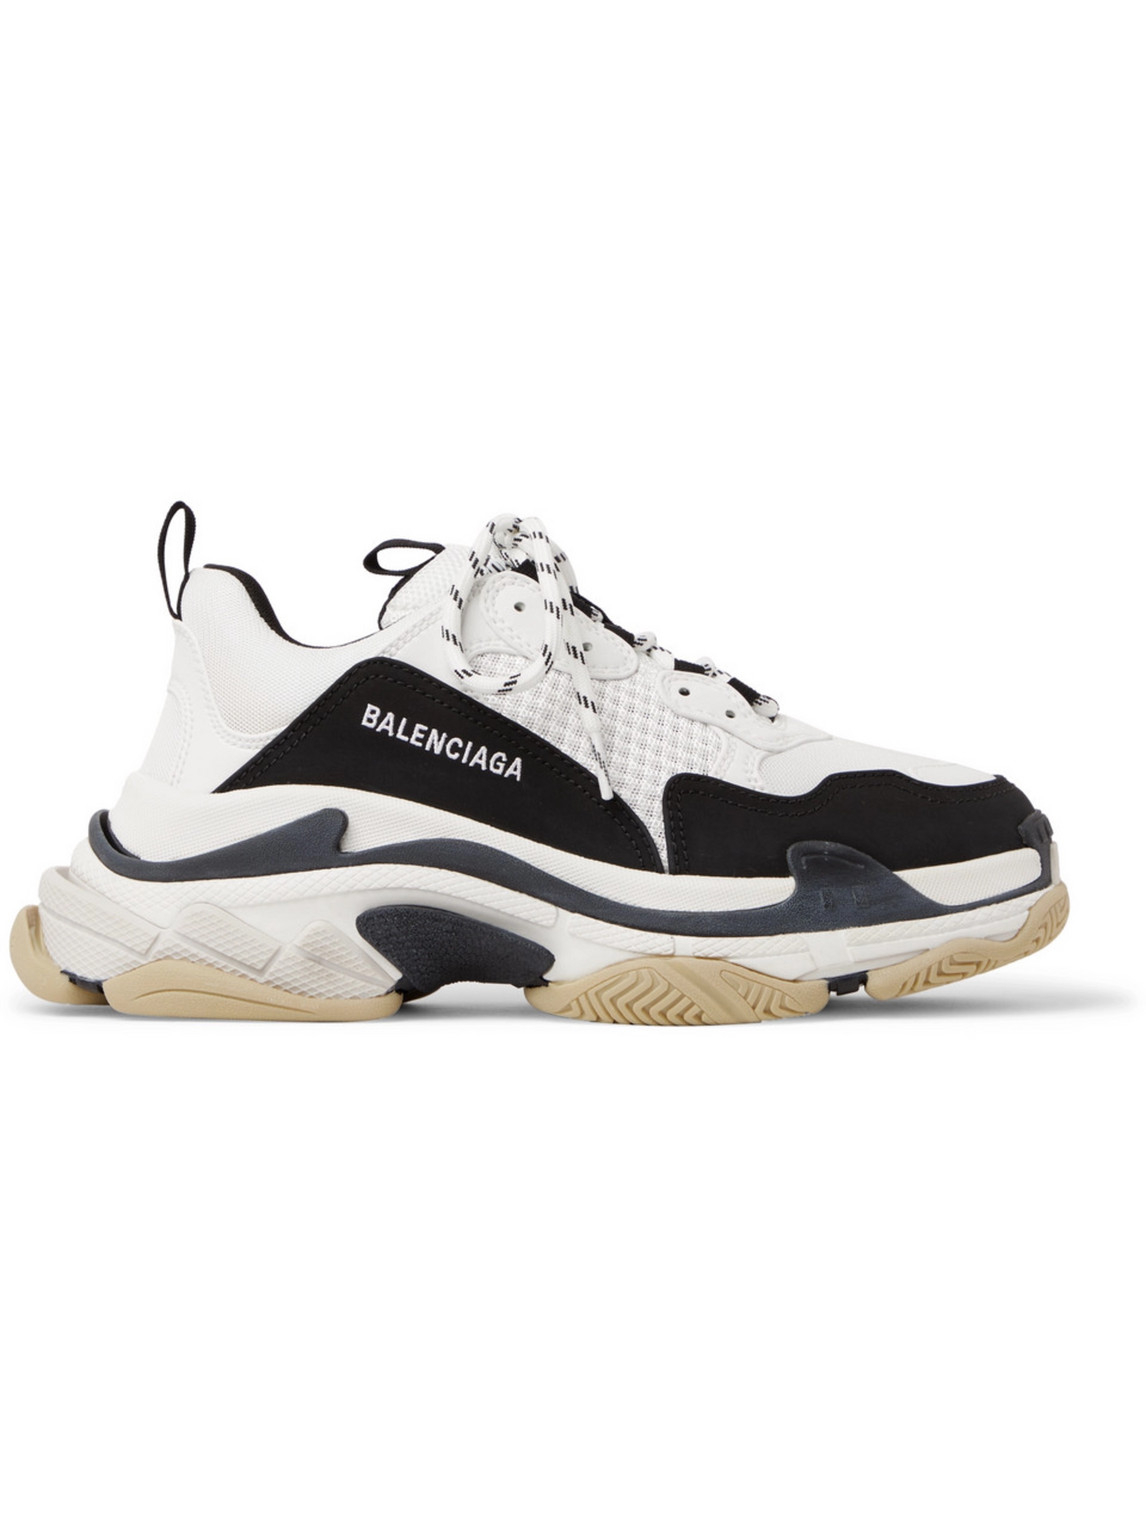 Balenciaga Triple S Mesh, Nubuck And Leather Sneakers In White